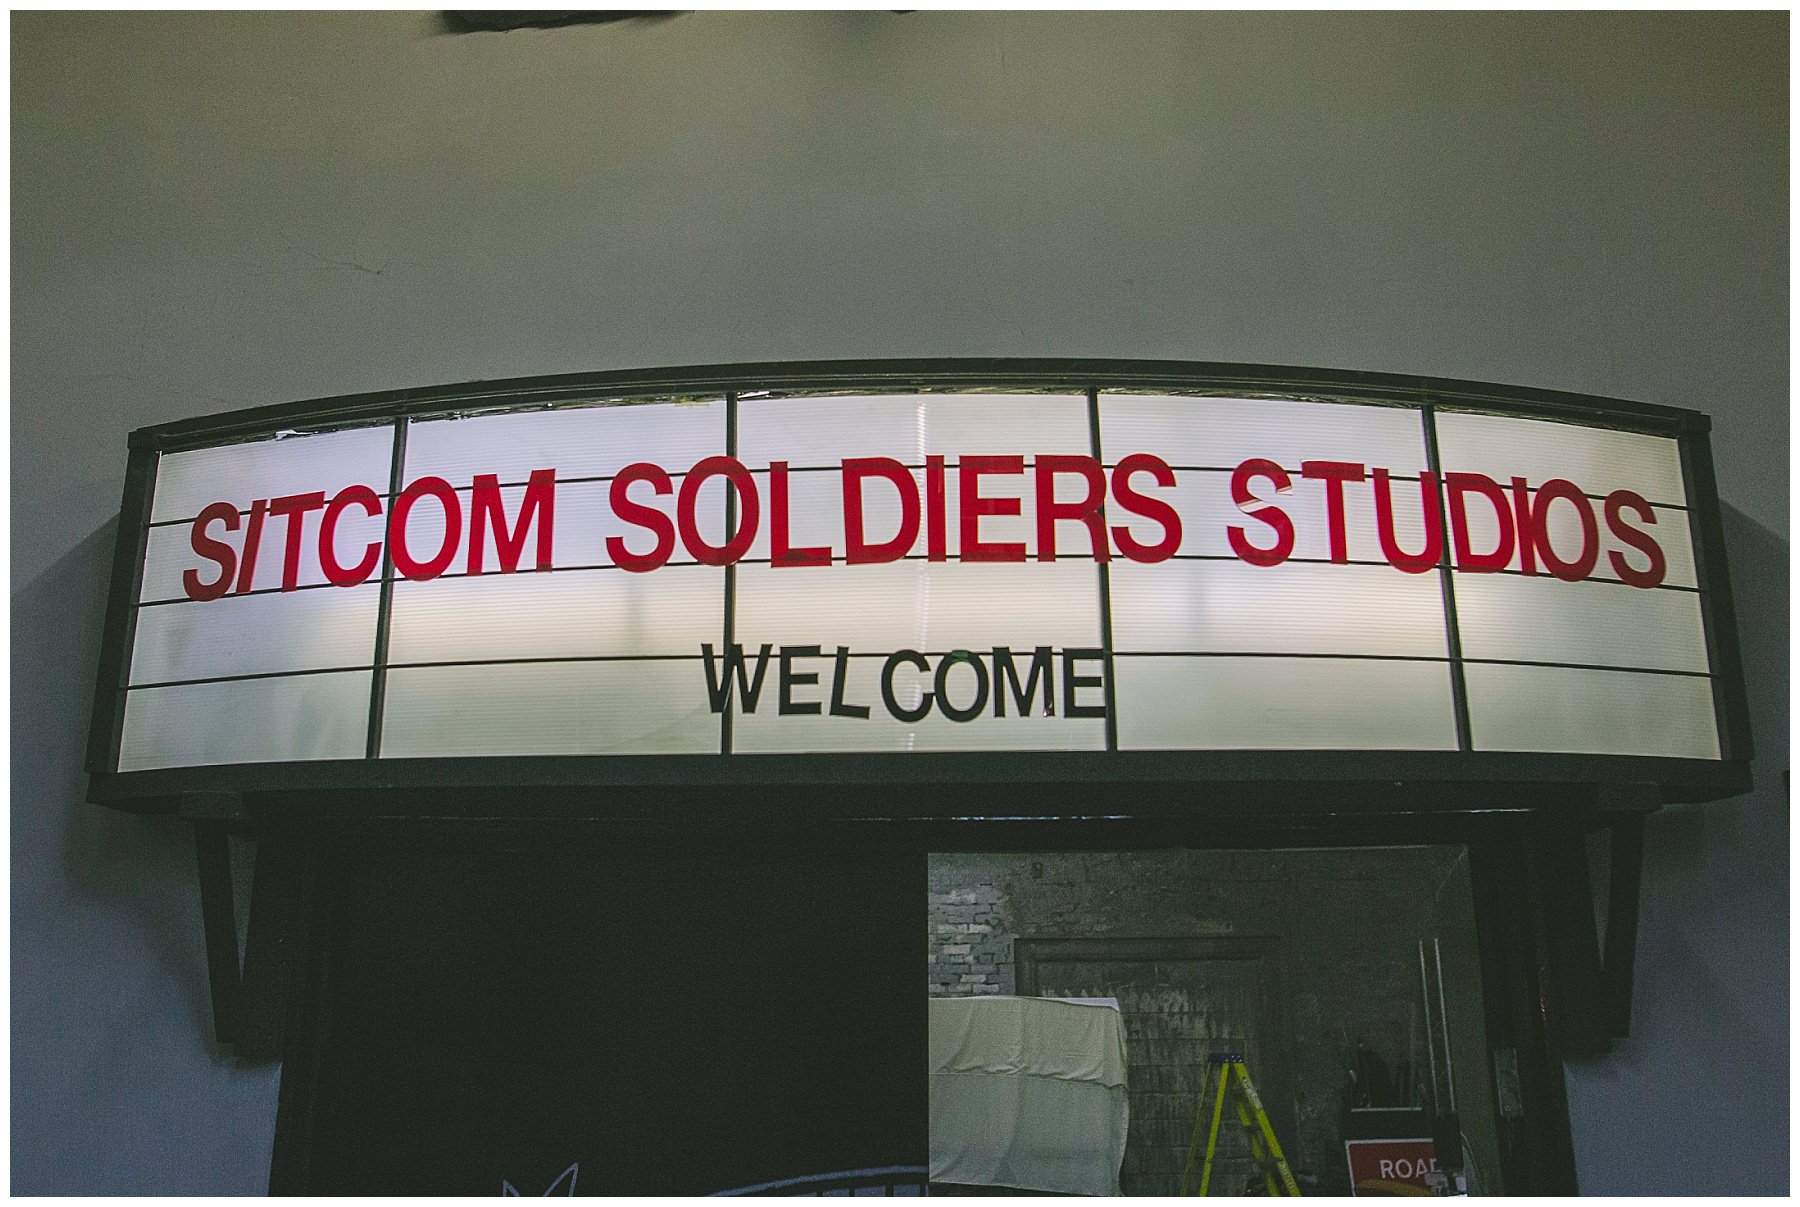 Welcome sign at sitcom soldiers